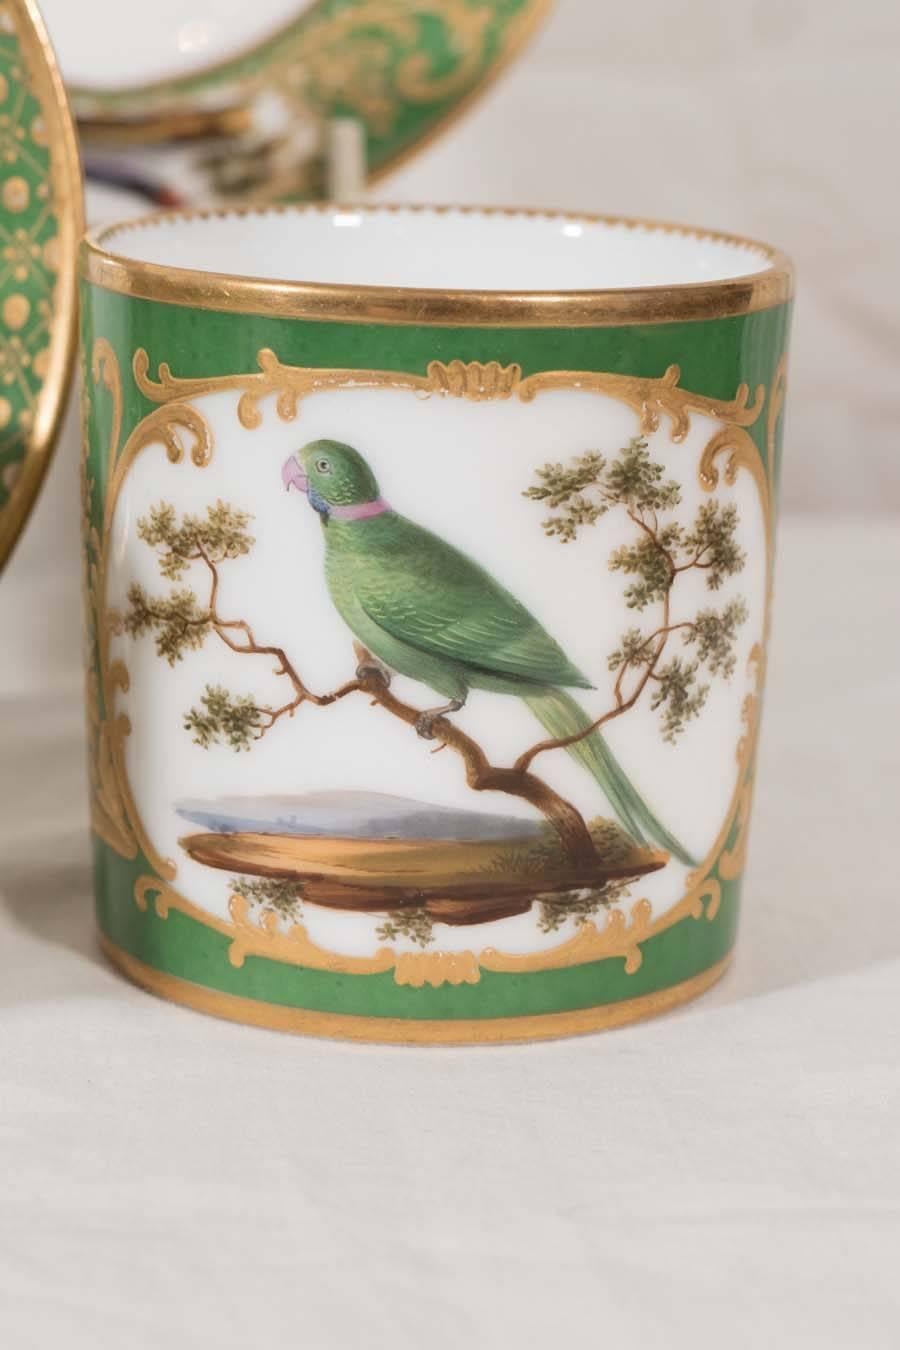 Mid-19th Century Four Paris Porcelain Coffee Cans with Hand-Painted Birds on a French Green Groun